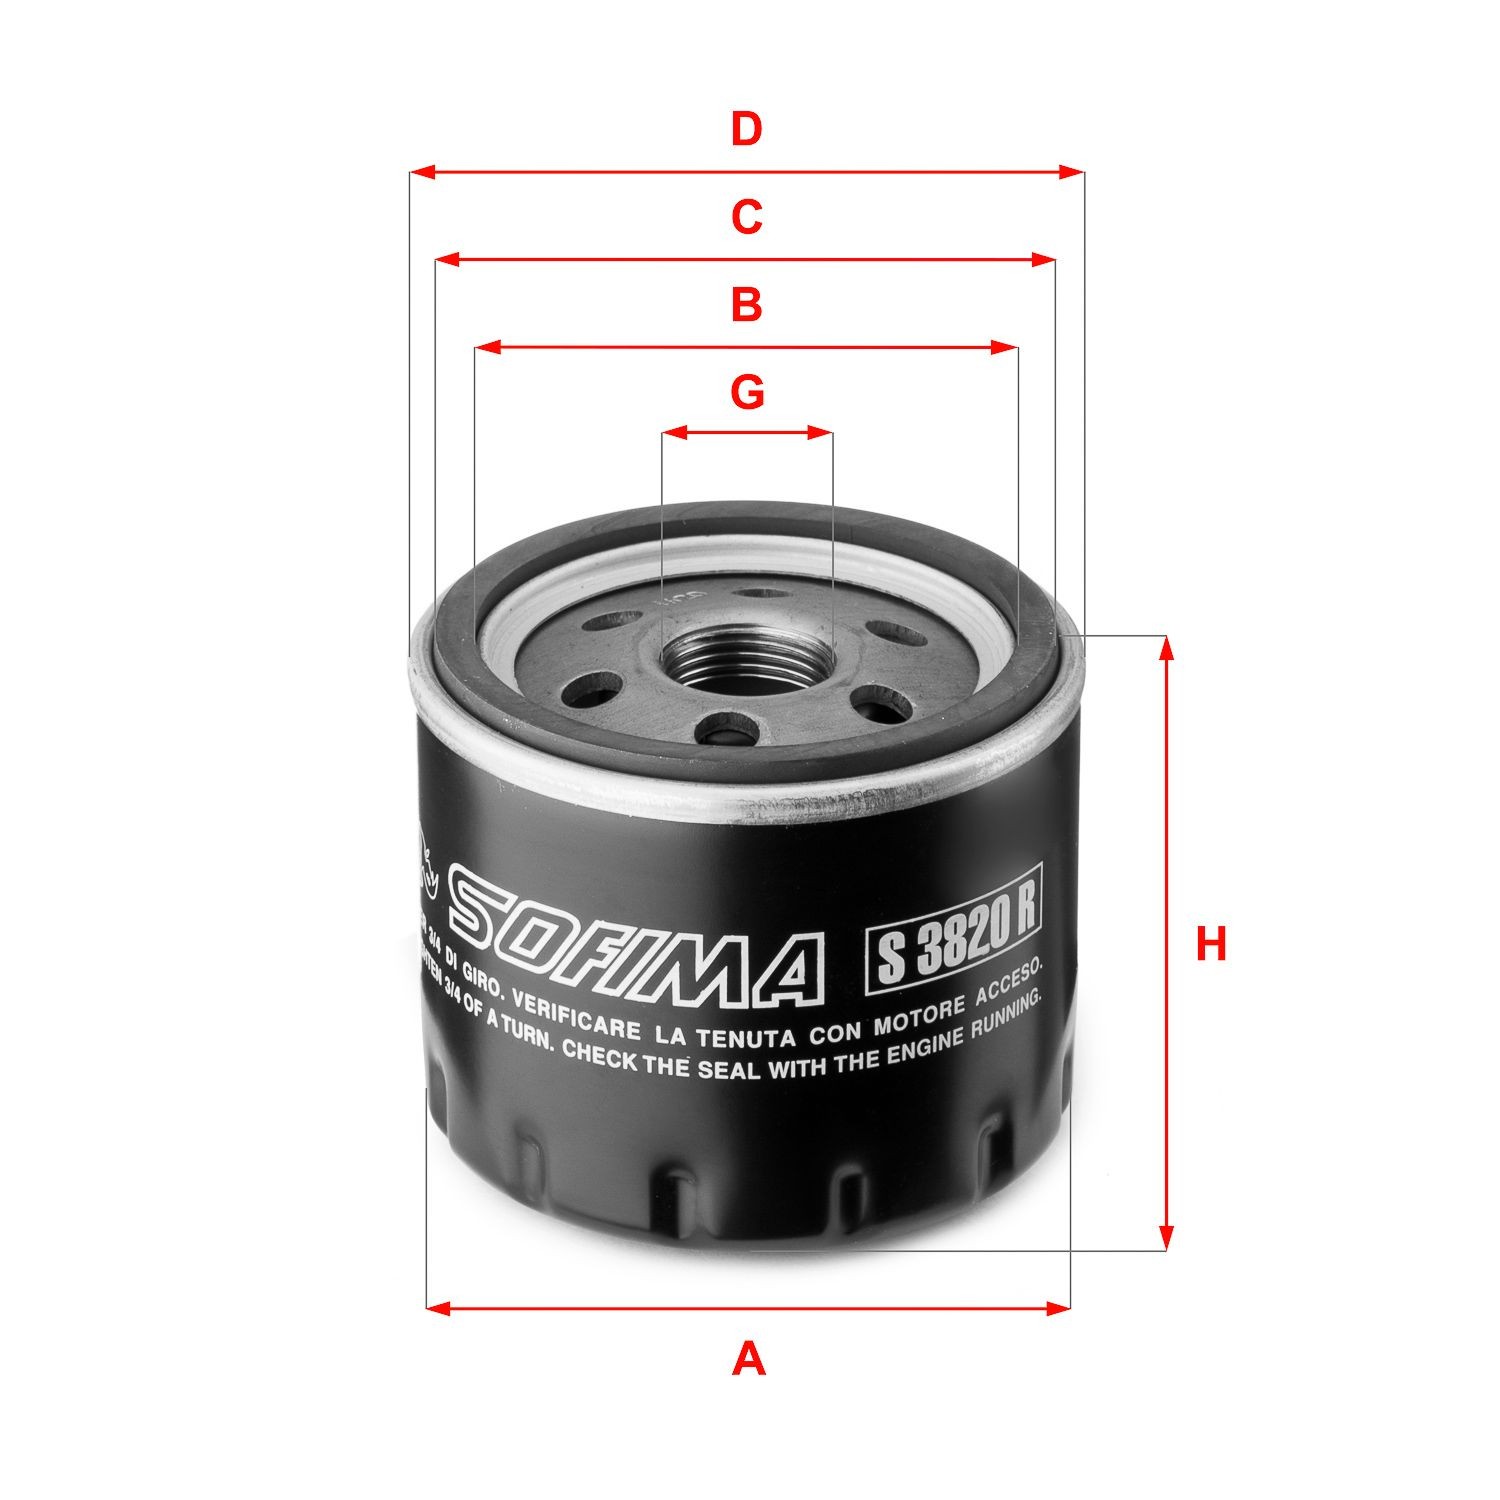 SOFIMA S3820R Oil filter 15208AW300